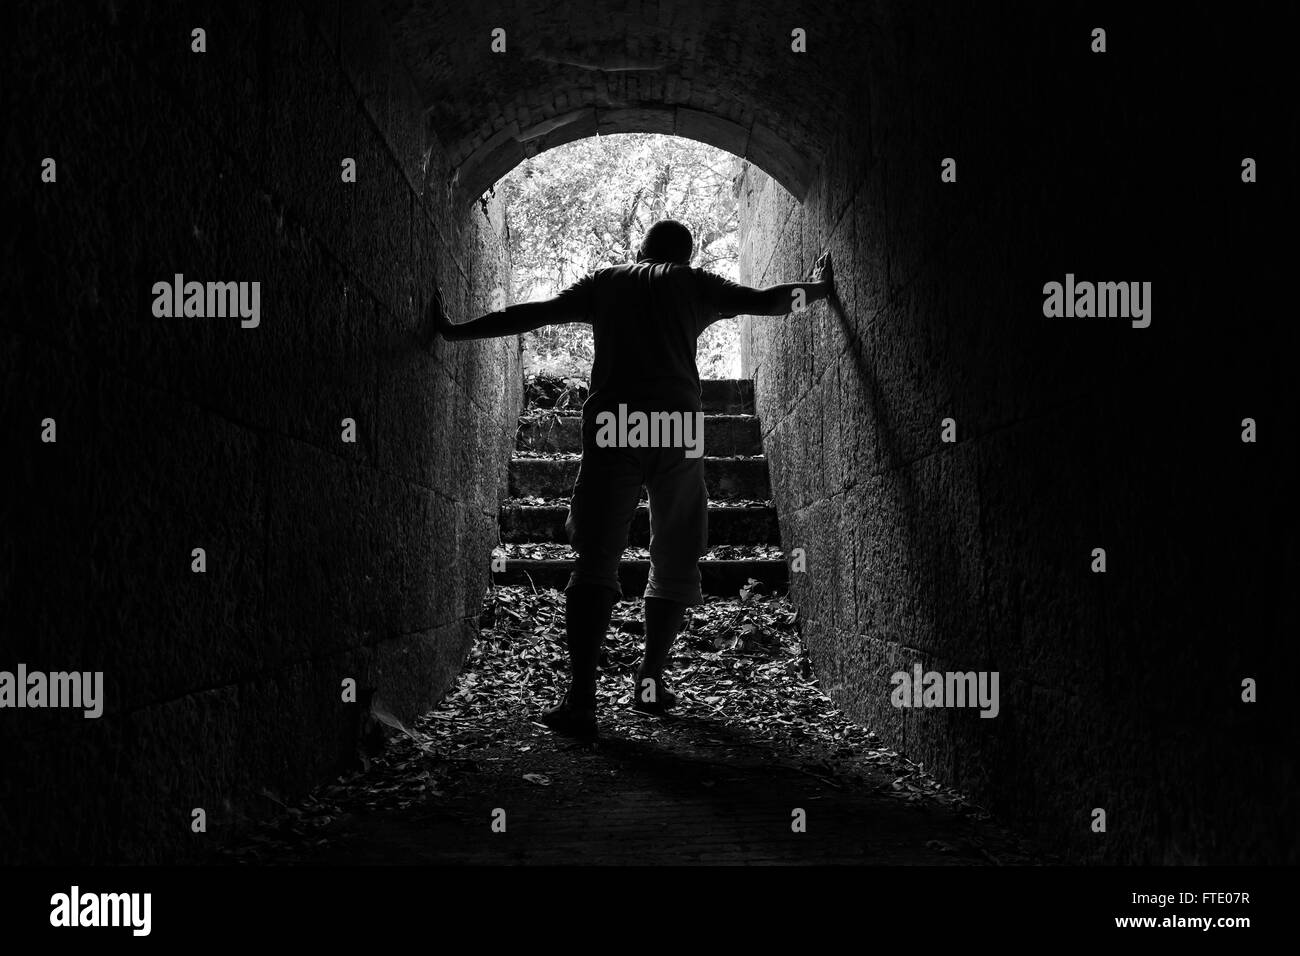 Young tired man leaves dark stone tunnel with glowing end, black and white photo Stock Photo